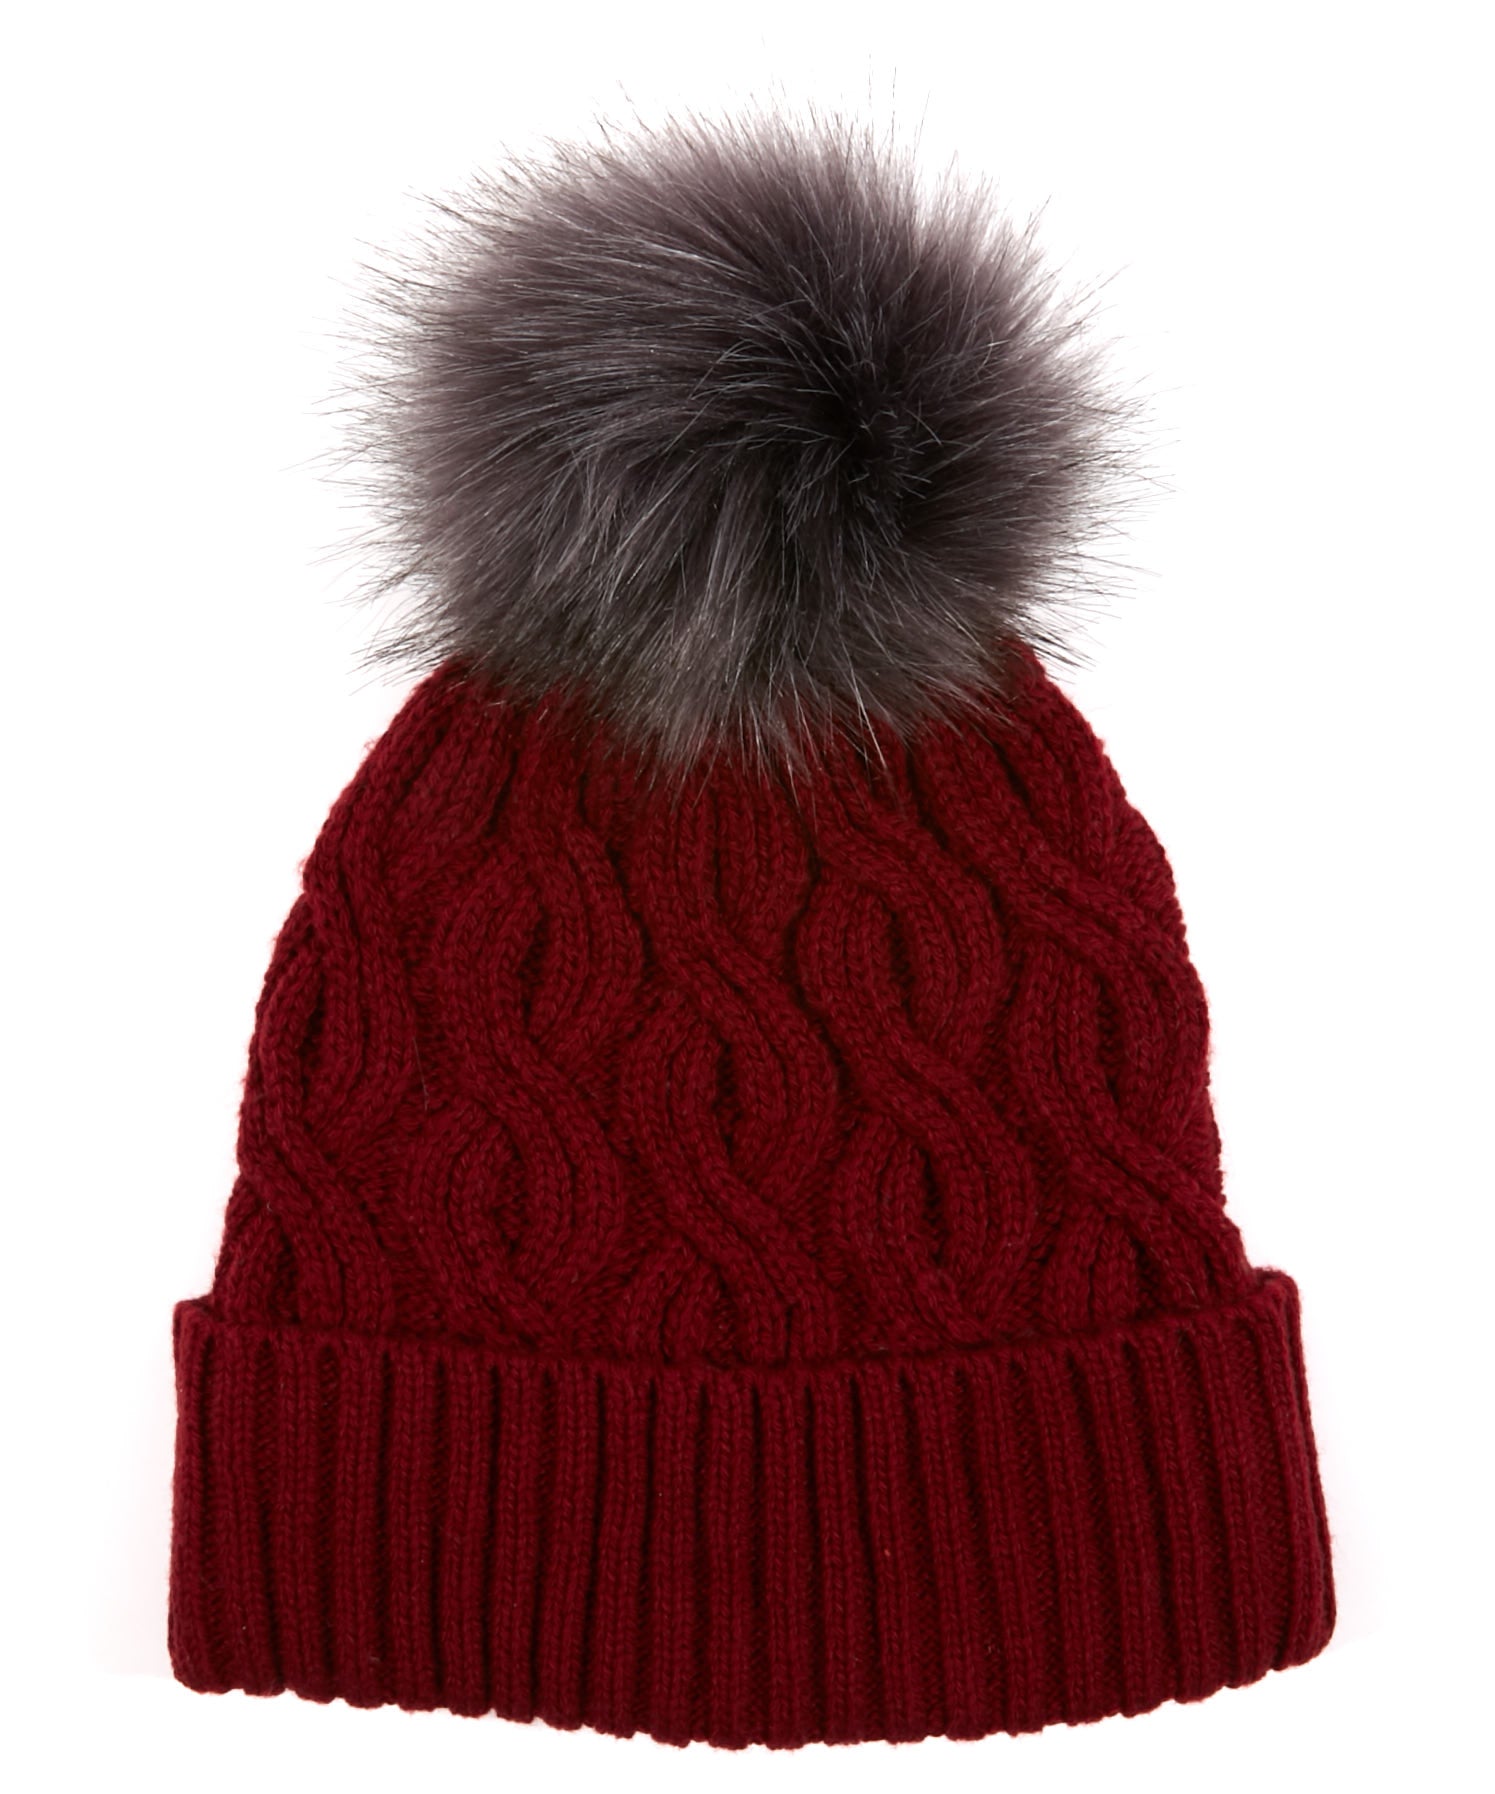 Recycled Pom Hat in color Rhubarb